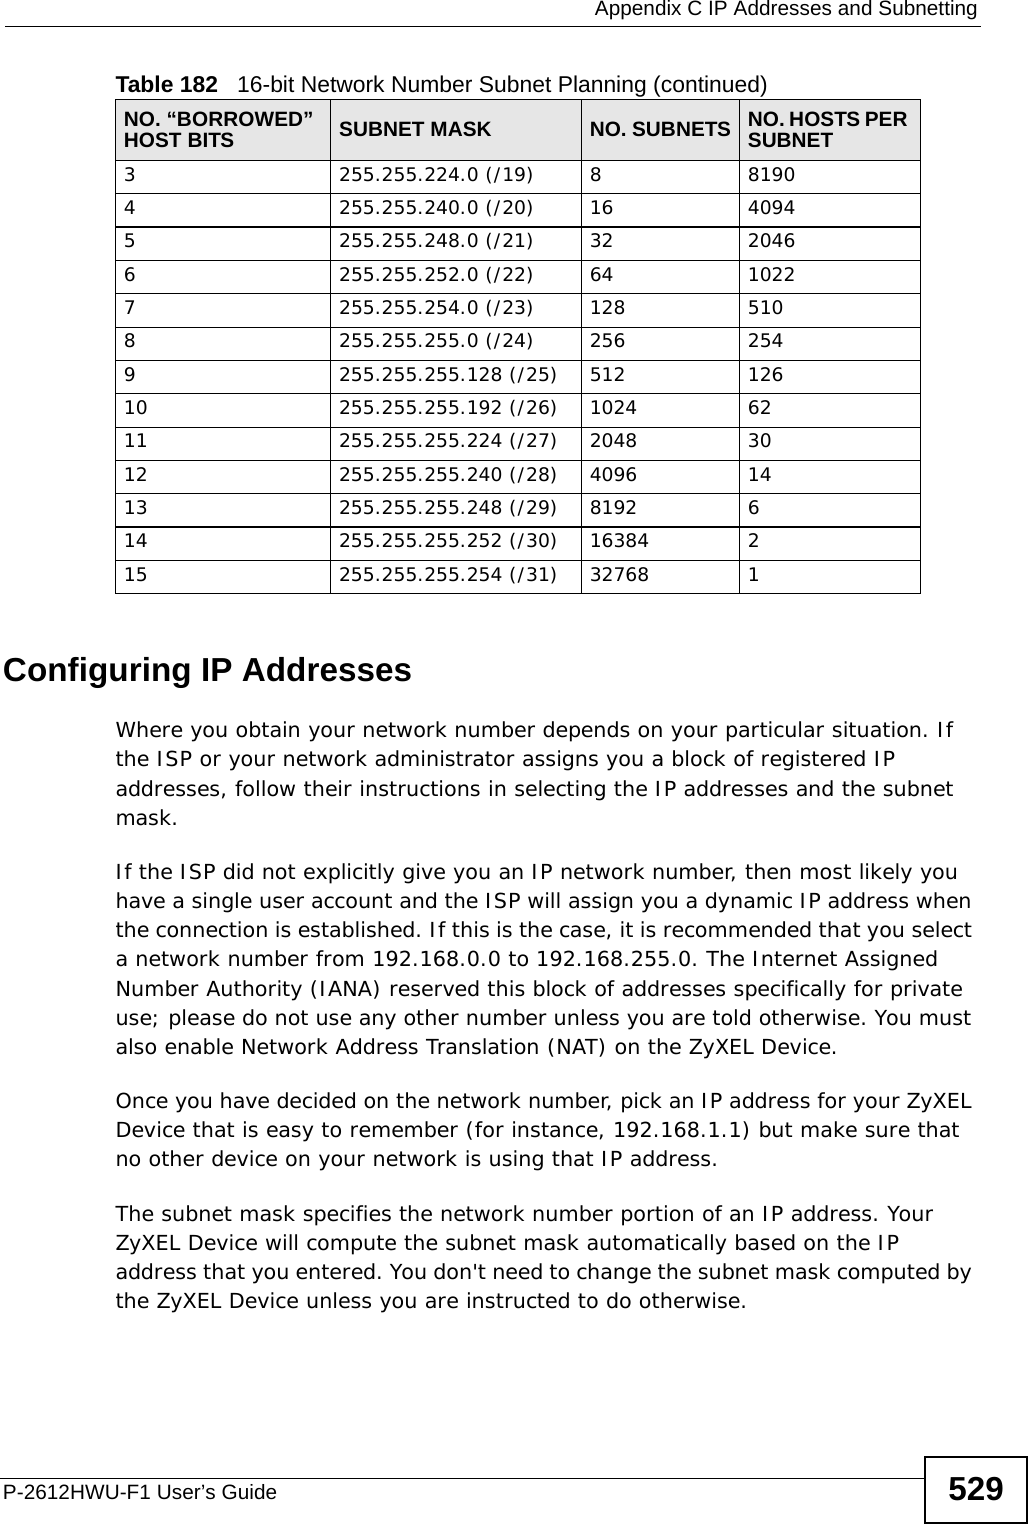  Appendix C IP Addresses and SubnettingP-2612HWU-F1 User’s Guide 529Configuring IP AddressesWhere you obtain your network number depends on your particular situation. If the ISP or your network administrator assigns you a block of registered IP addresses, follow their instructions in selecting the IP addresses and the subnet mask.If the ISP did not explicitly give you an IP network number, then most likely you have a single user account and the ISP will assign you a dynamic IP address when the connection is established. If this is the case, it is recommended that you select a network number from 192.168.0.0 to 192.168.255.0. The Internet Assigned Number Authority (IANA) reserved this block of addresses specifically for private use; please do not use any other number unless you are told otherwise. You must also enable Network Address Translation (NAT) on the ZyXEL Device. Once you have decided on the network number, pick an IP address for your ZyXEL Device that is easy to remember (for instance, 192.168.1.1) but make sure that no other device on your network is using that IP address.The subnet mask specifies the network number portion of an IP address. Your ZyXEL Device will compute the subnet mask automatically based on the IP address that you entered. You don&apos;t need to change the subnet mask computed by the ZyXEL Device unless you are instructed to do otherwise.3255.255.224.0 (/19) 881904255.255.240.0 (/20) 16 40945255.255.248.0 (/21) 32 20466255.255.252.0 (/22) 64 10227255.255.254.0 (/23) 128 5108255.255.255.0 (/24) 256 2549255.255.255.128 (/25) 512 12610 255.255.255.192 (/26) 1024 6211 255.255.255.224 (/27) 2048 3012 255.255.255.240 (/28) 4096 1413 255.255.255.248 (/29) 8192 614 255.255.255.252 (/30) 16384 215 255.255.255.254 (/31) 32768 1Table 182   16-bit Network Number Subnet Planning (continued)NO. “BORROWED” HOST BITS SUBNET MASK NO. SUBNETS NO. HOSTS PER SUBNET